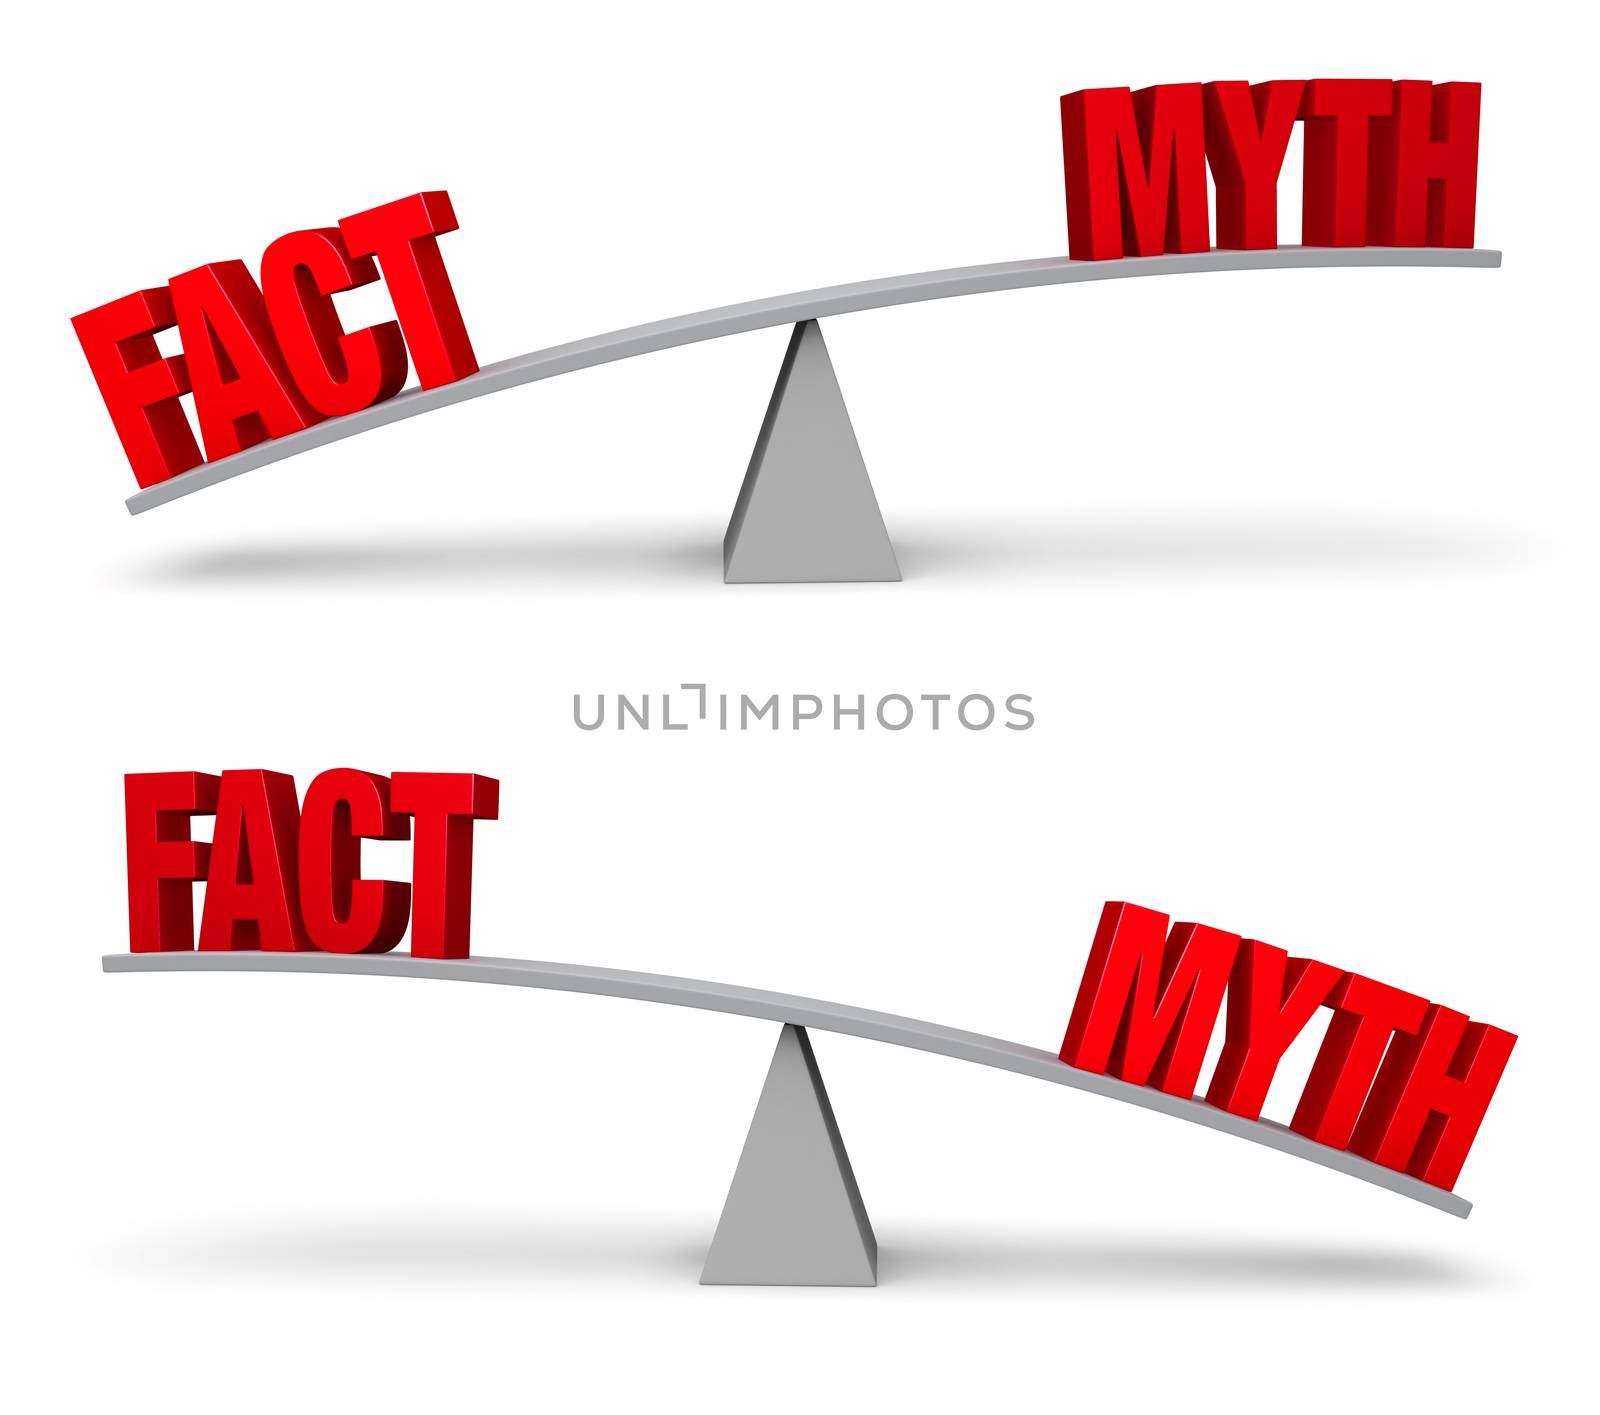 Set of two images. In each, a red "FACT" and "MYTH" sit on opposite ends of a gray balance board.  In one image, "FACT" outweighs "MYTH" in the other, "MYTH" outweighs "FACT". Isolated on white.